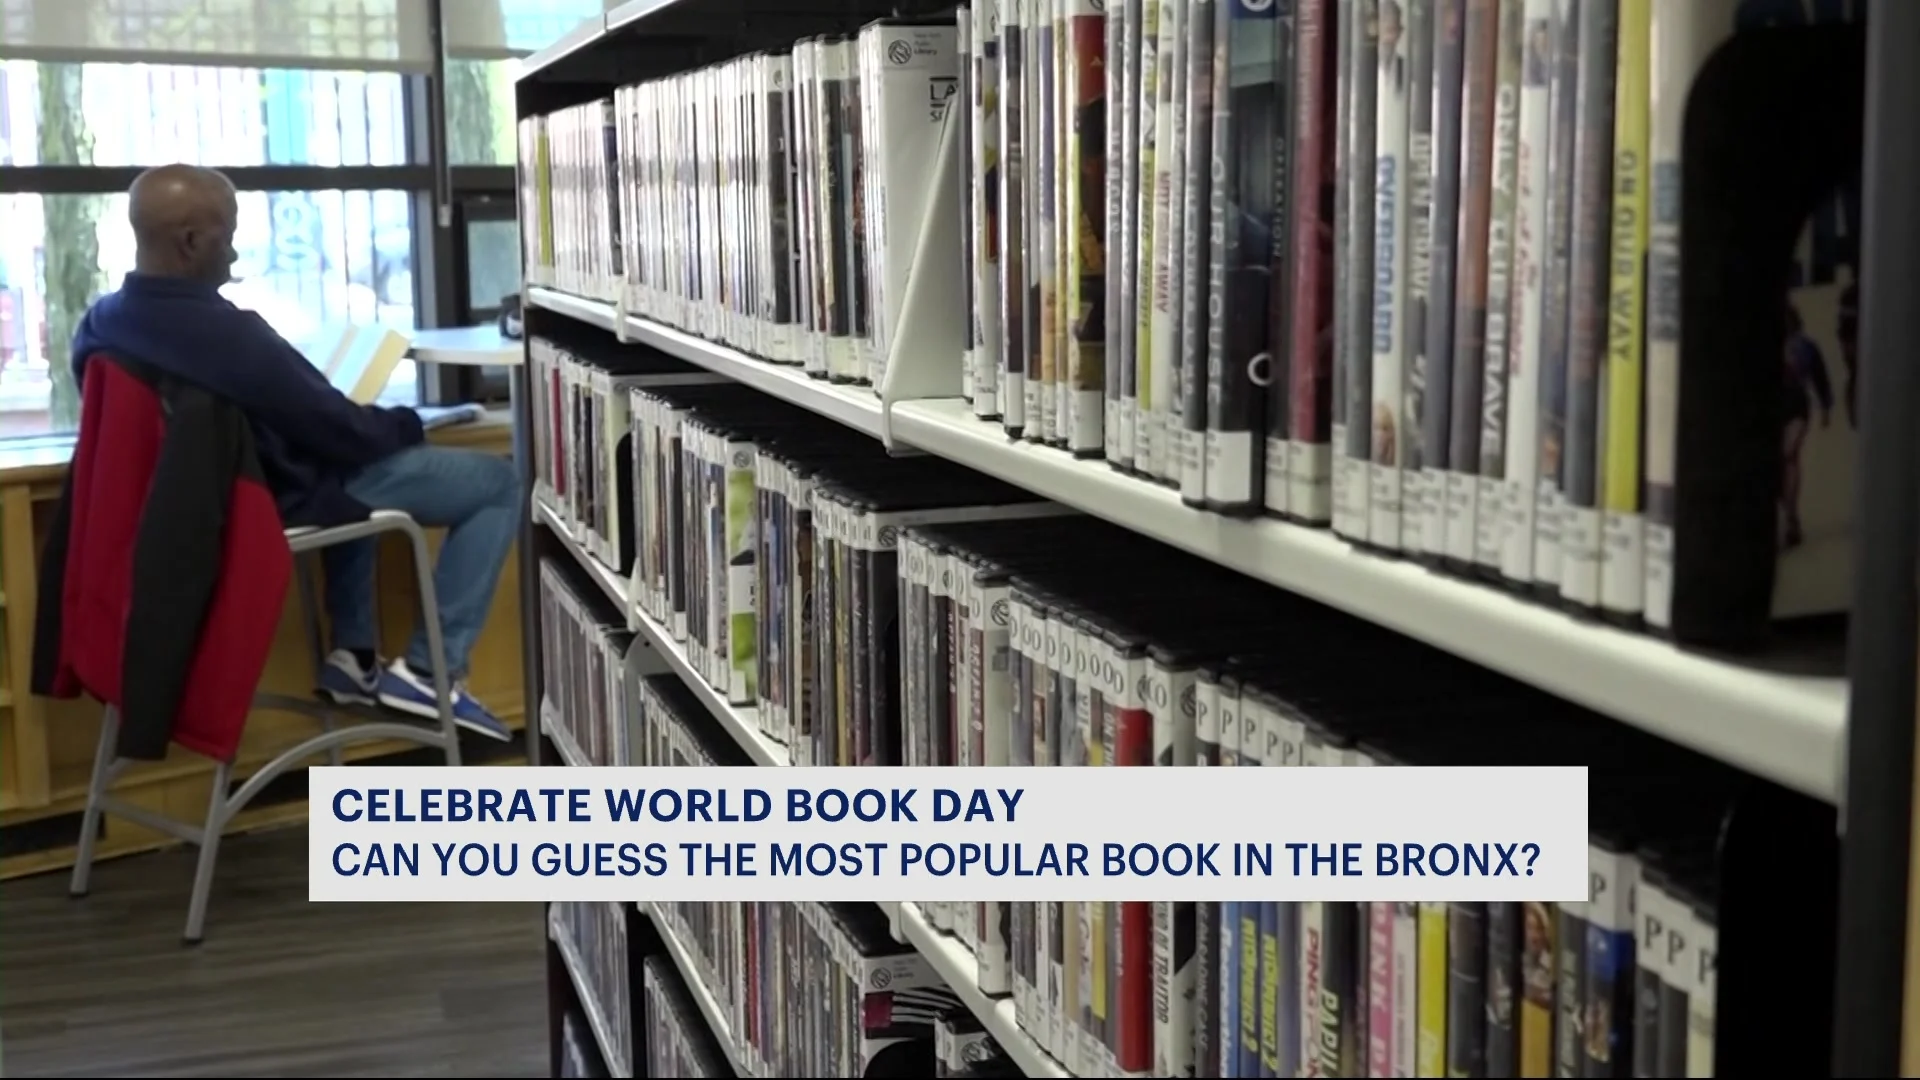 Bronx bookworms join writing workshop to celebrate World Book Day